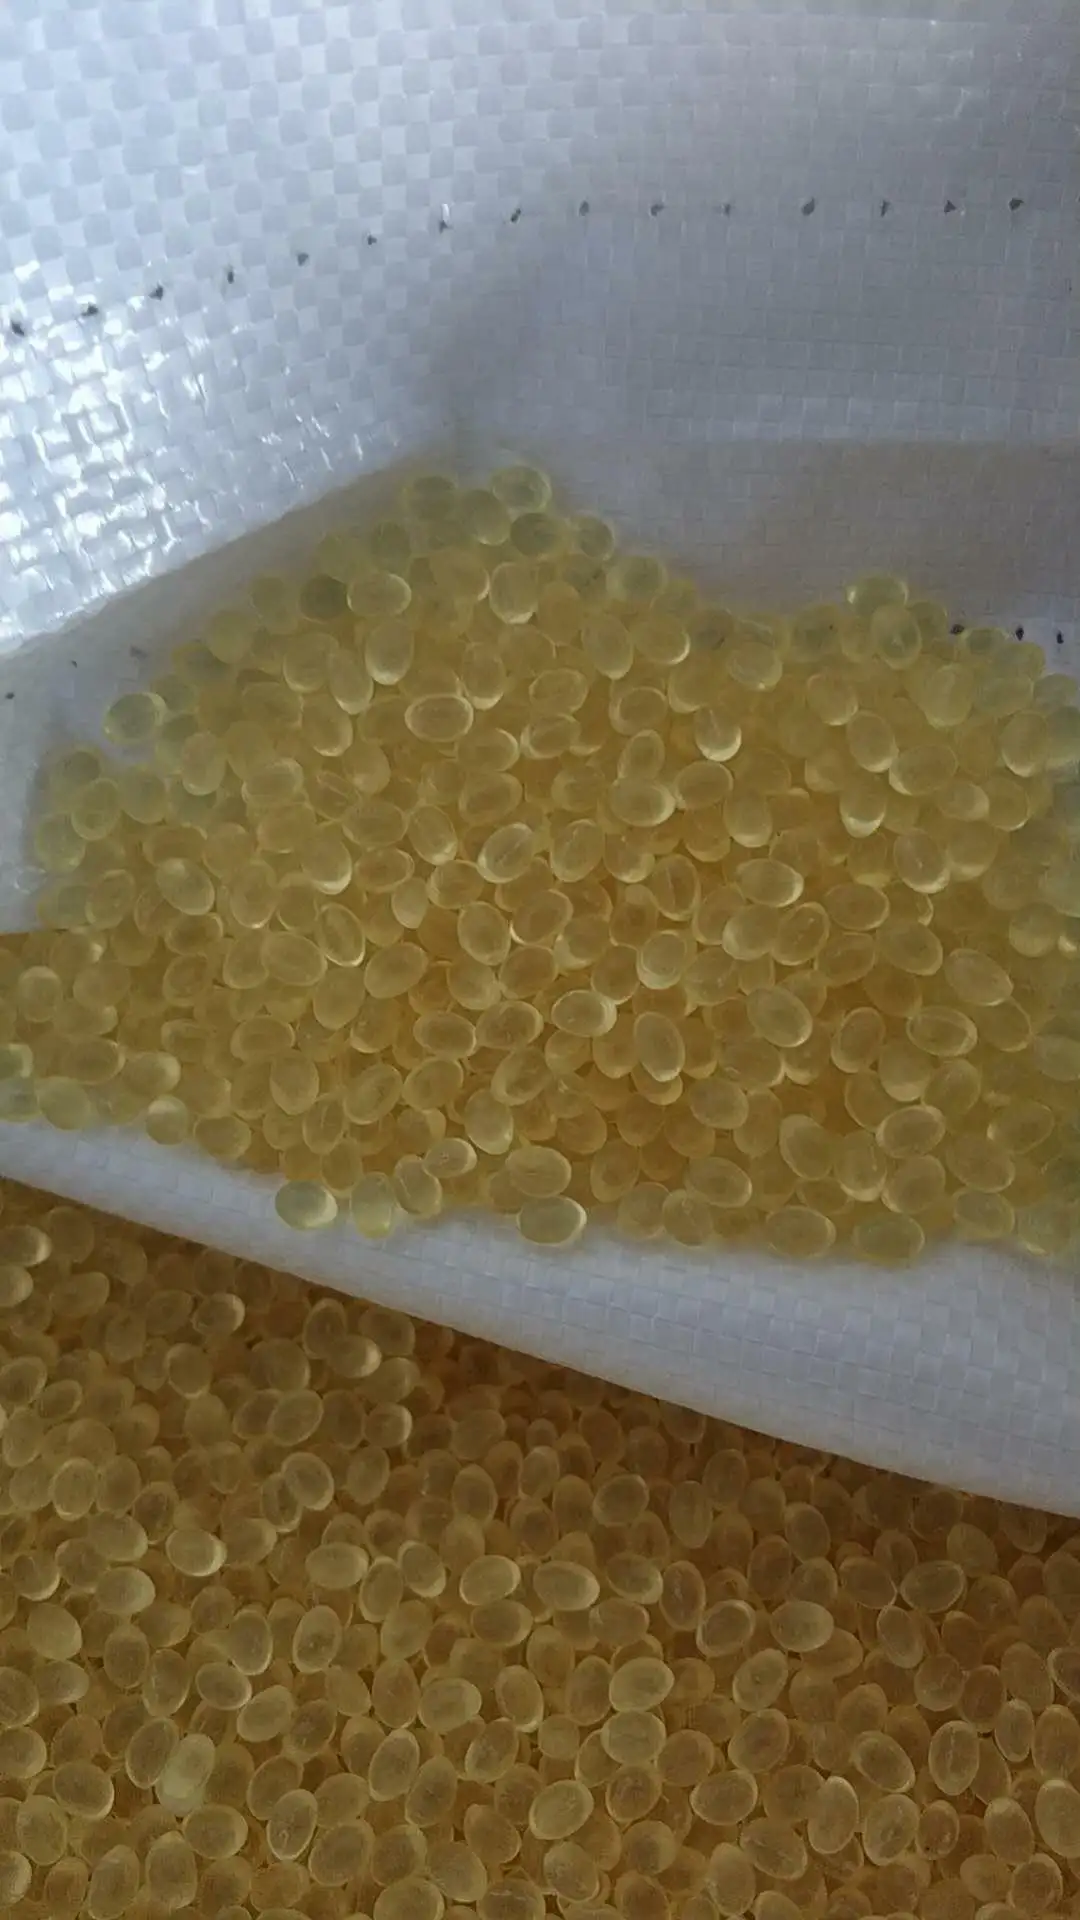 CPP-104 Chlorinated Polypropylene Resin Particles For Medium Chlorine Molecules Chlorinated Polypropylene For Plastics And Ink